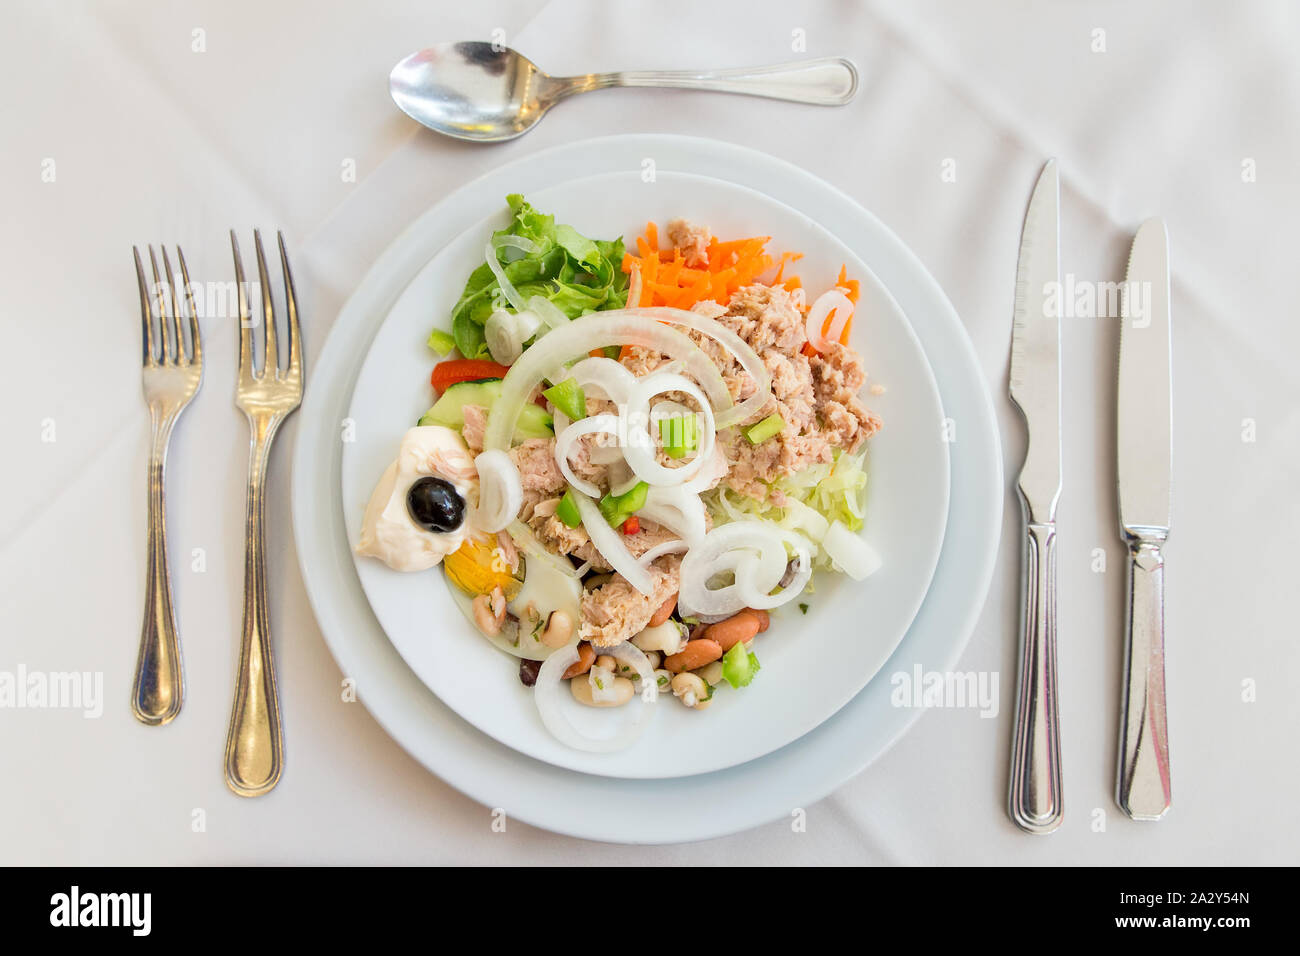 Plate with fresh salad on set table with garnish Stock Photo